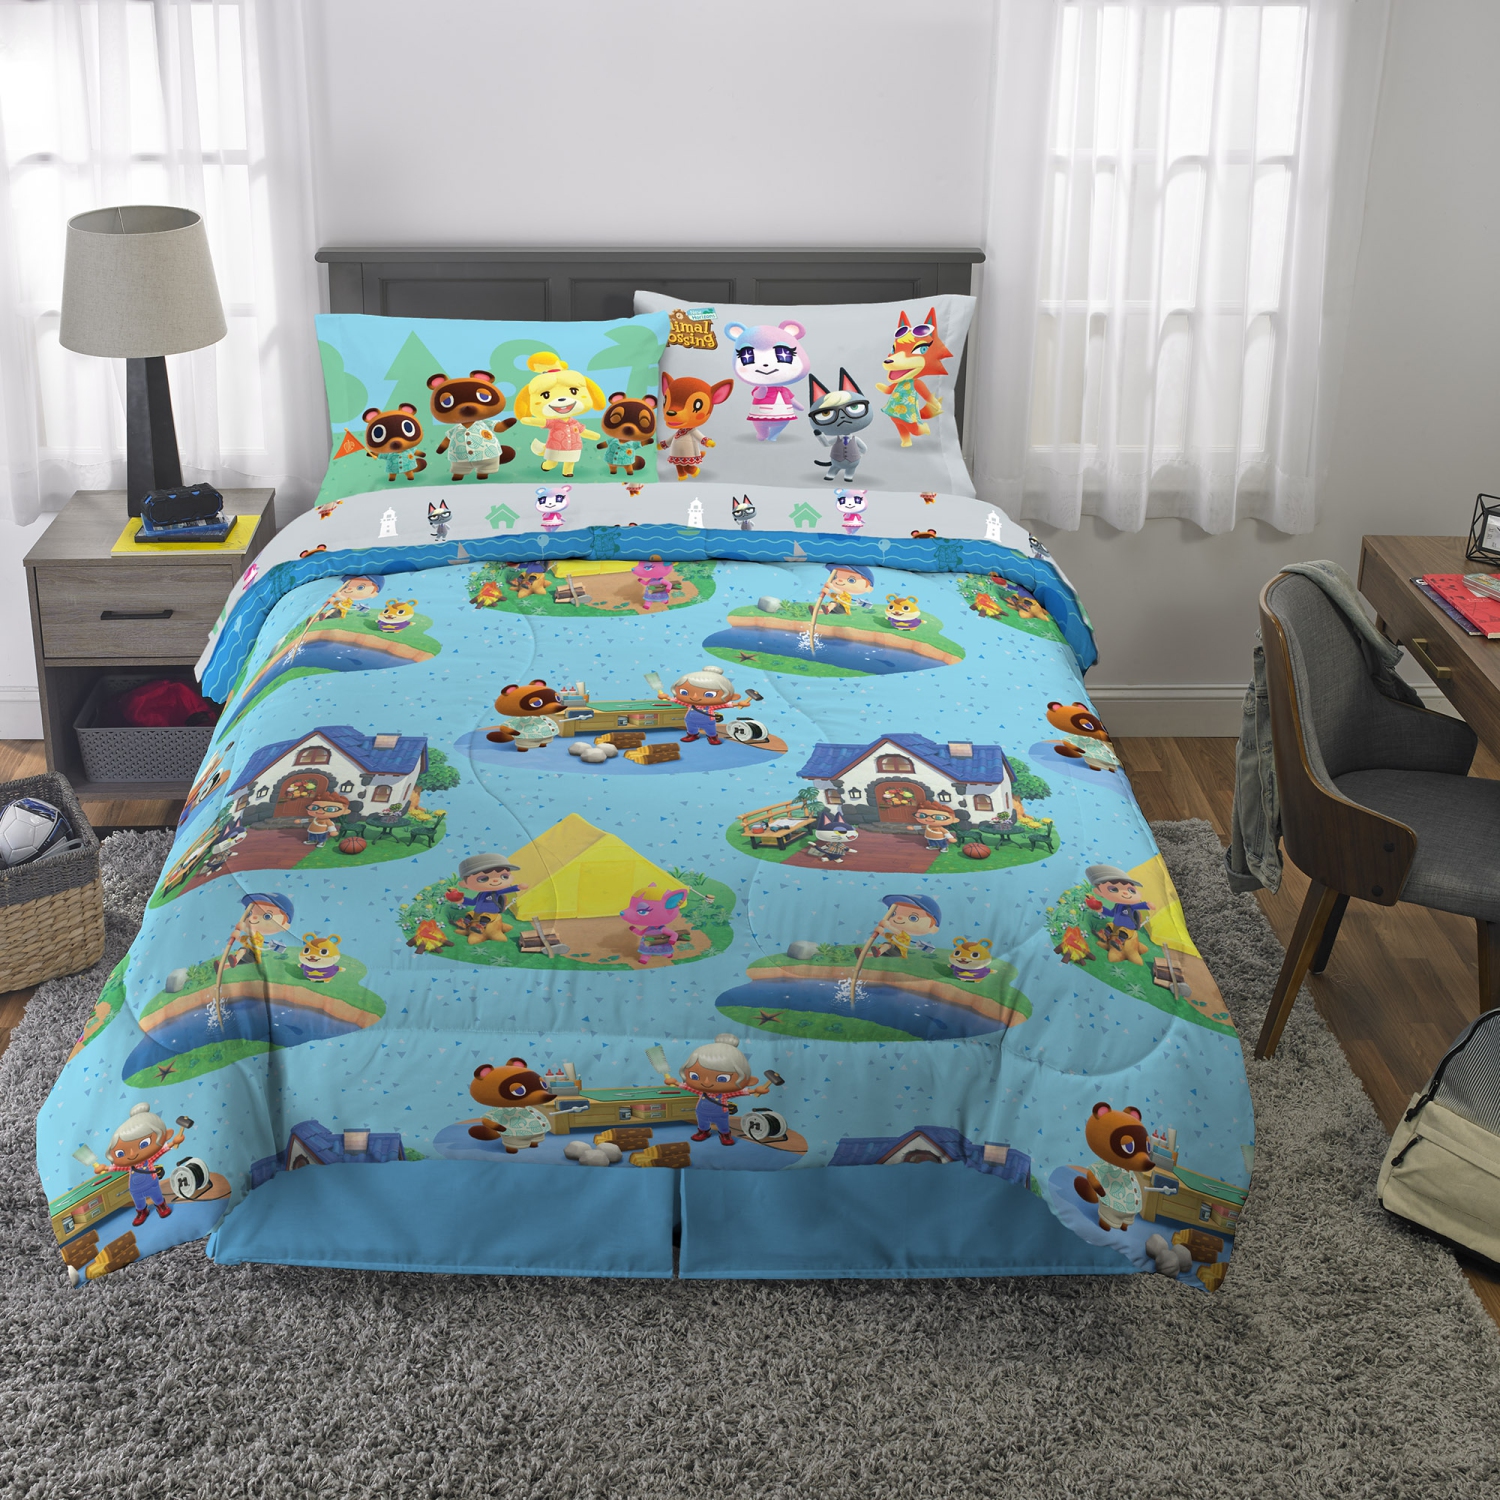 Animal Crossing New Horizons 4 Pcs Twin Sheet Set with Reversible Comforter Pillowcase - Kids Mattress Pattern Bedding Flat Fitted Sheets with Printed Game Characters